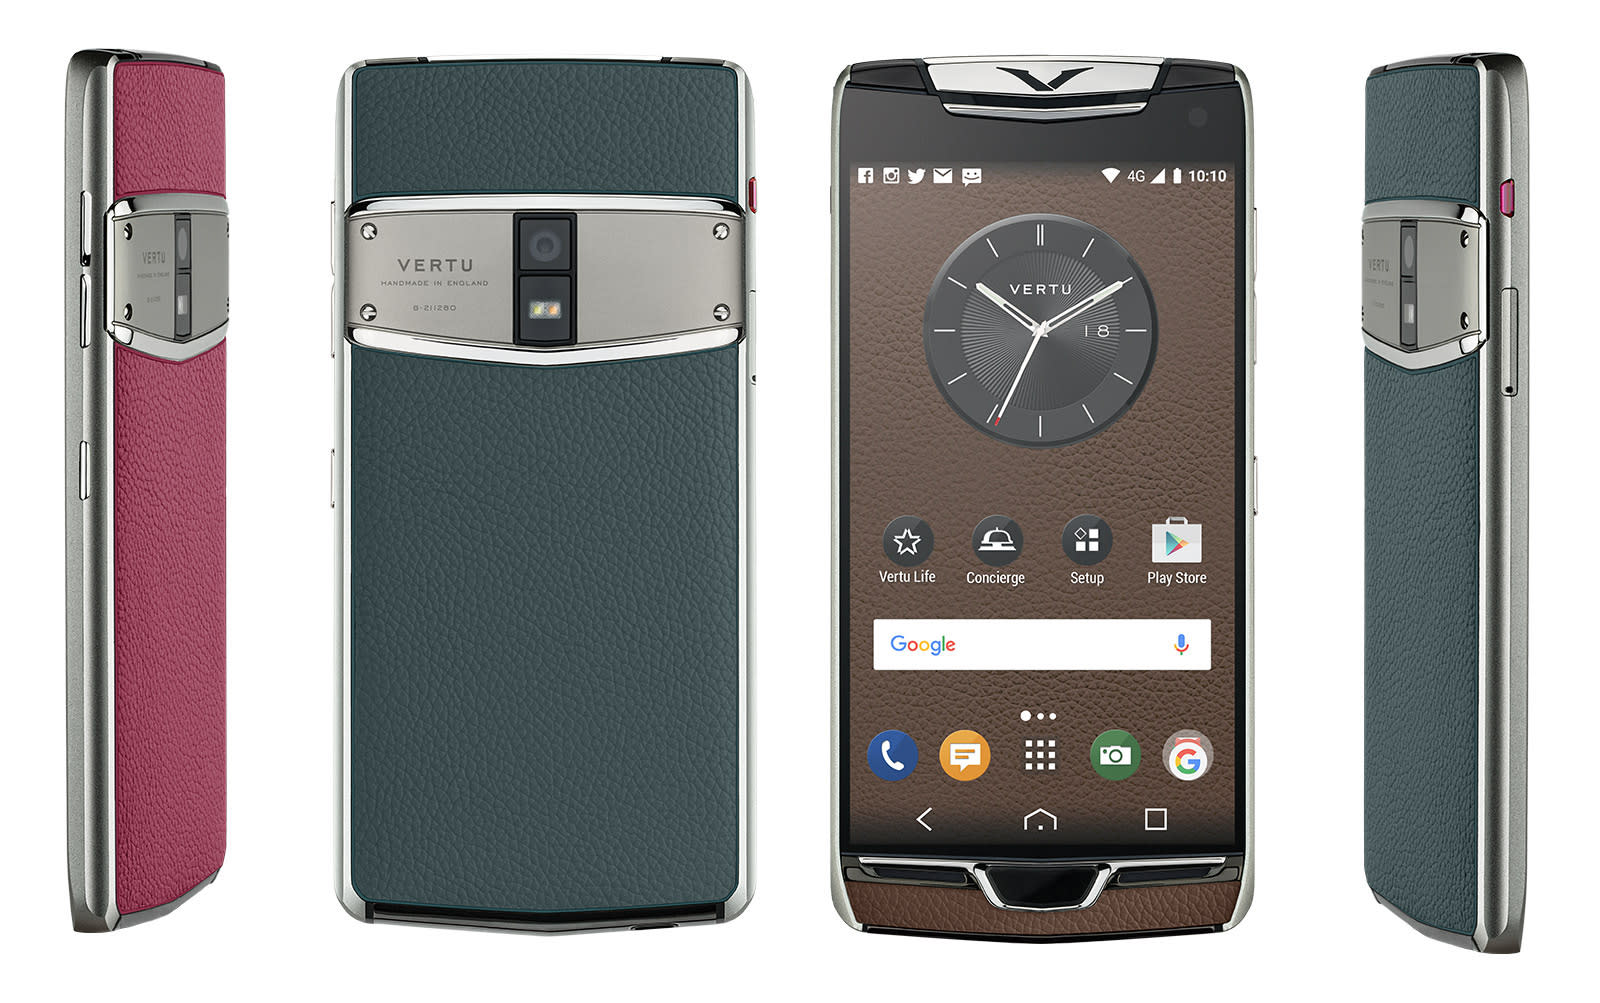 Vertu's latest luxury Android phone is built for jetsetters